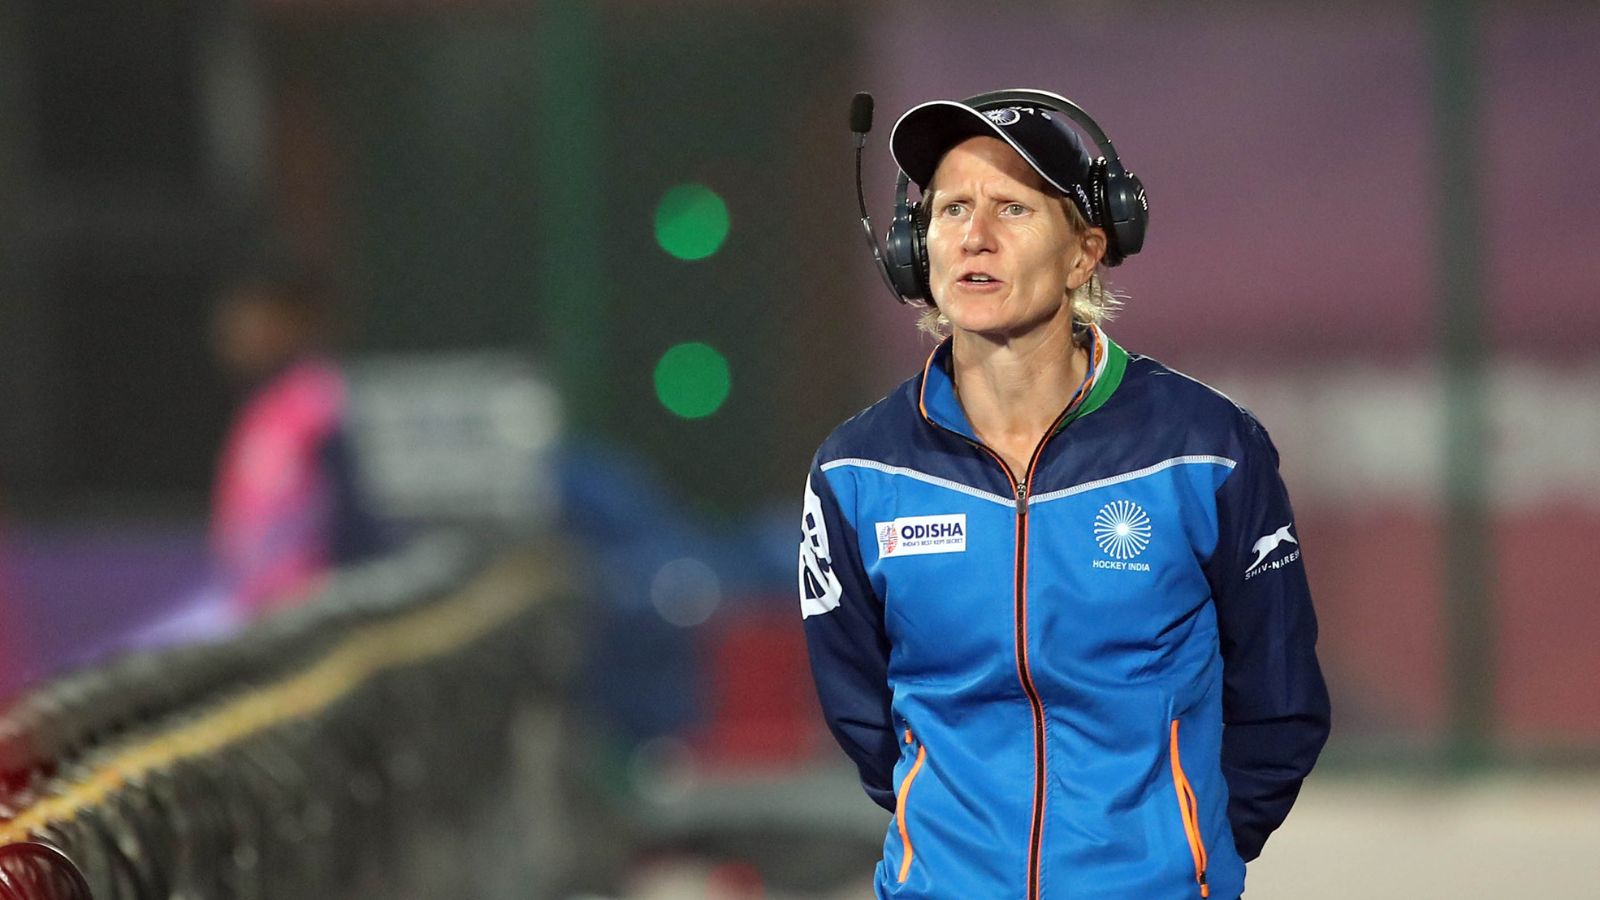 android, janneke schopman resigns as chief coach of indian women’s hockey team days after speaking out against treatment